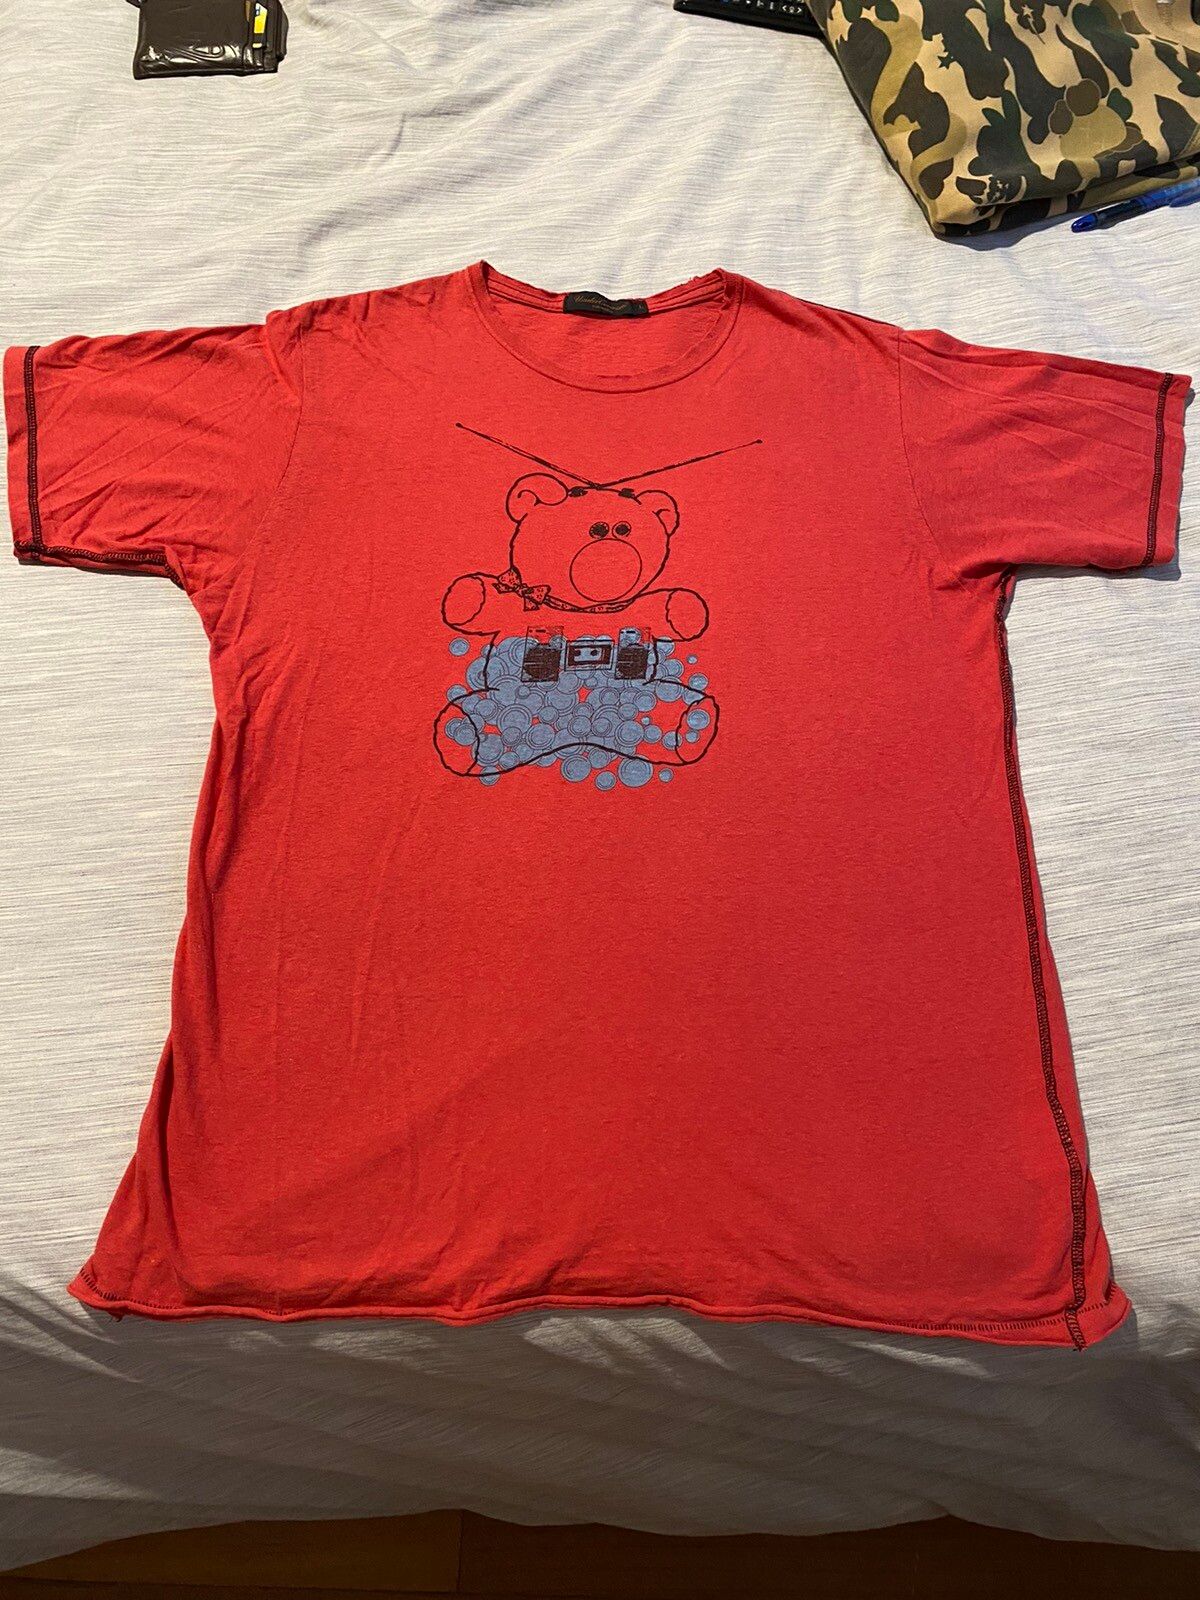 Undercover Undercover Scab Bear Red T-shirt Size US L / EU 52-54 / 3 - 1 Preview